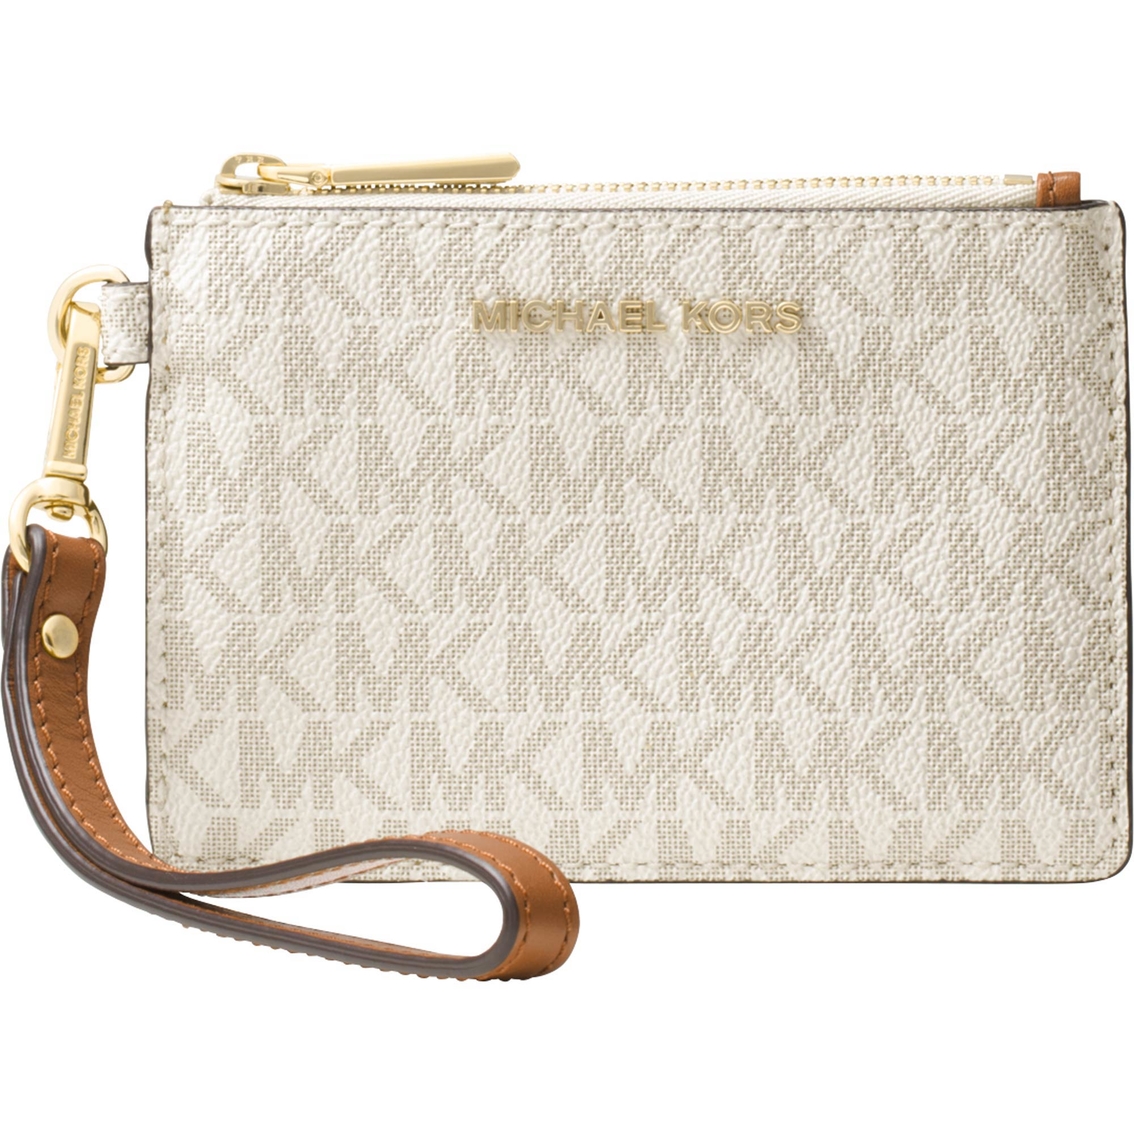 concealed carry purse michael kors